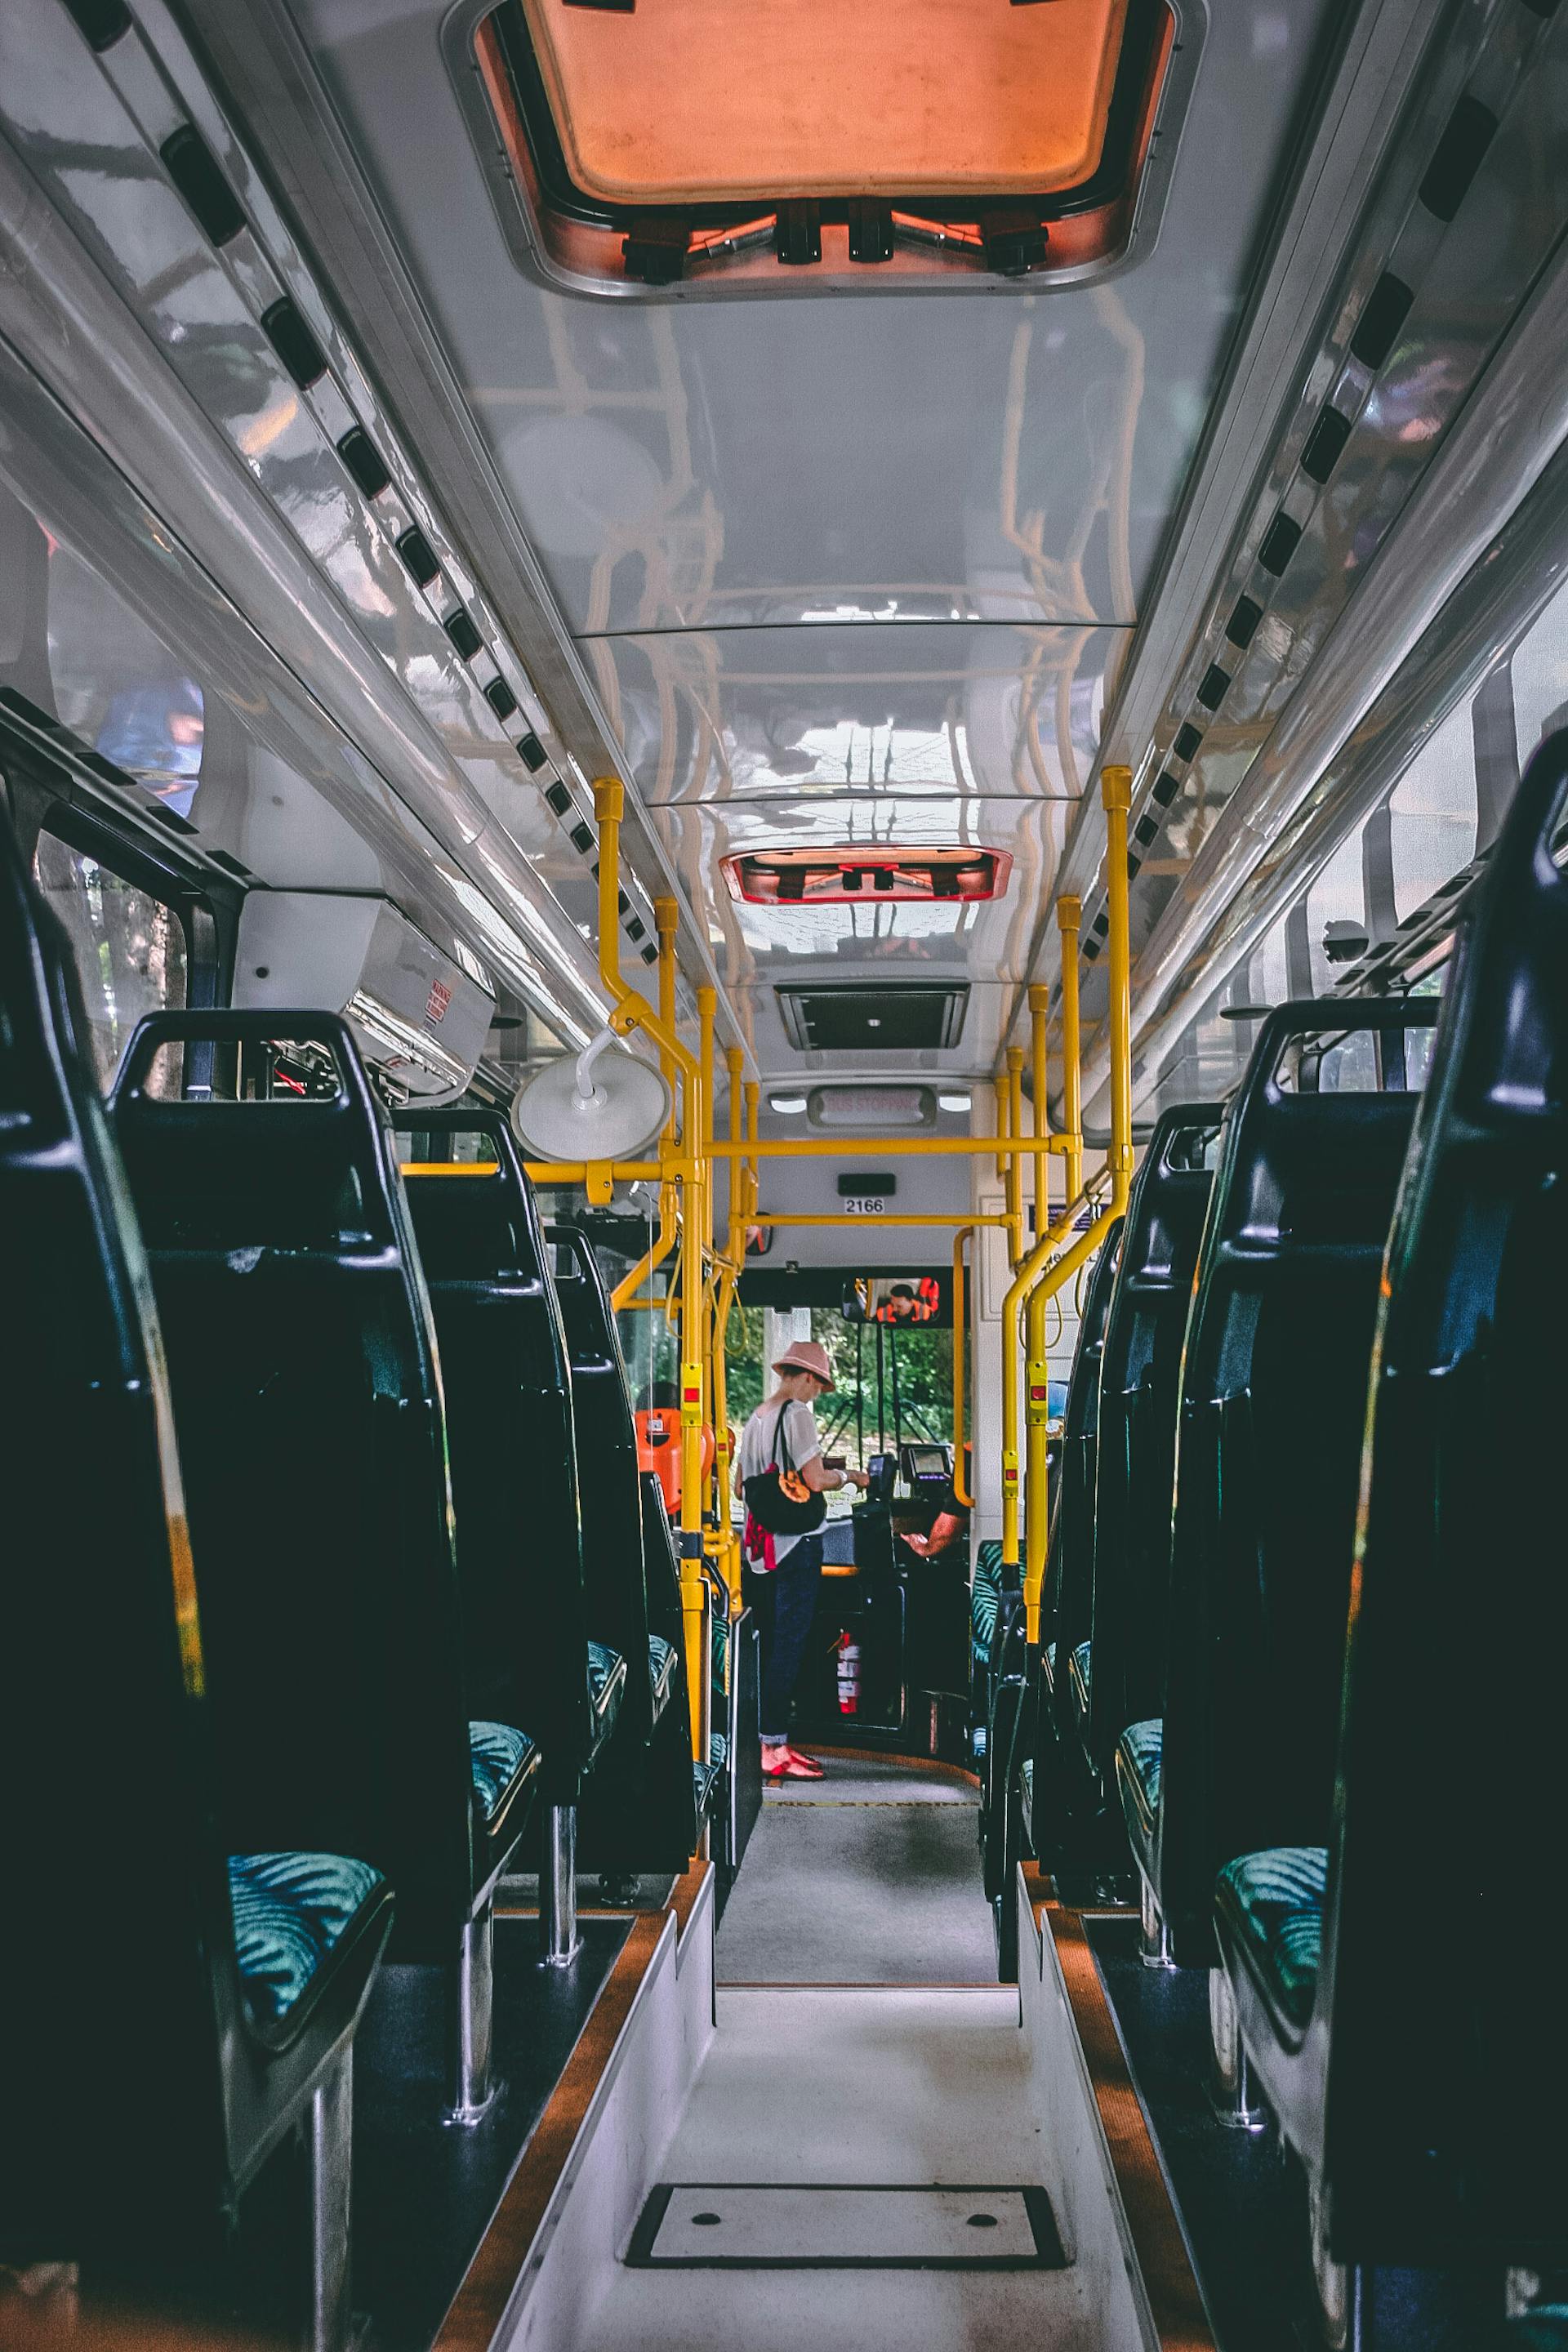 A woman standing in a bus | Source: Pexels